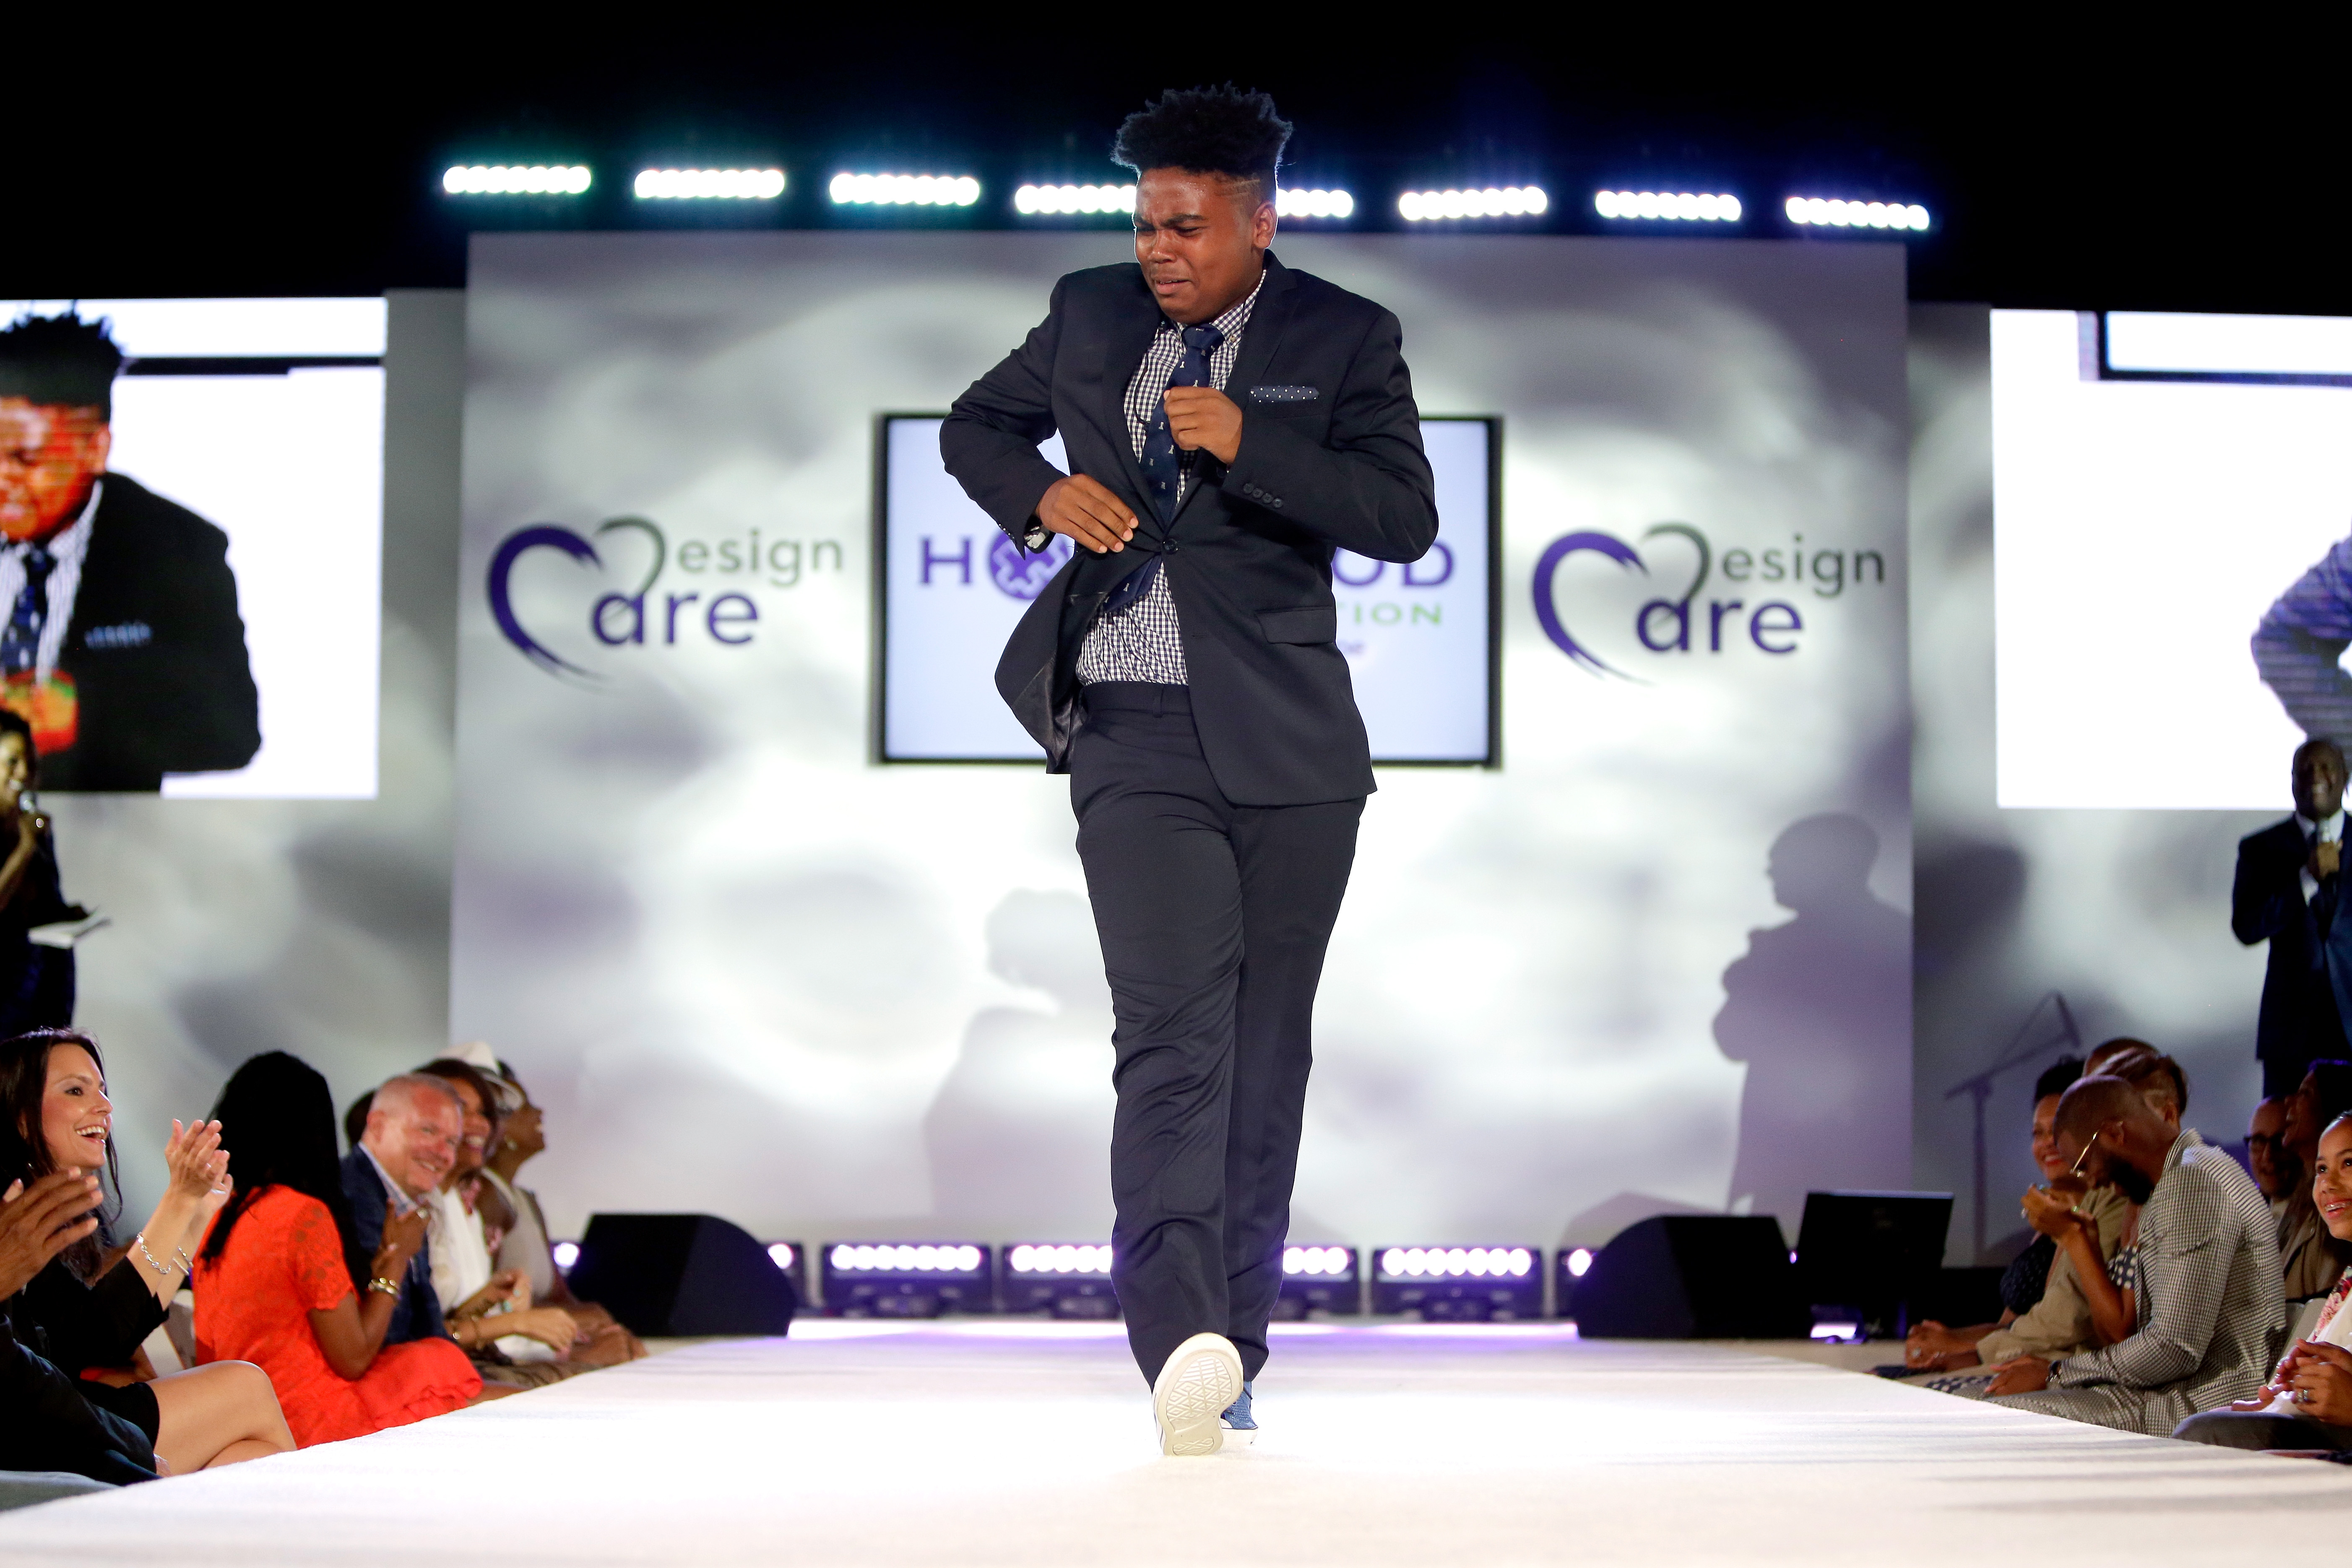 Robinson James Peete walks the runway at HollyRod Foundation's DesignCare Gala on July 16, 2016, in Pacific Palisades, California. | Source: Getty Images